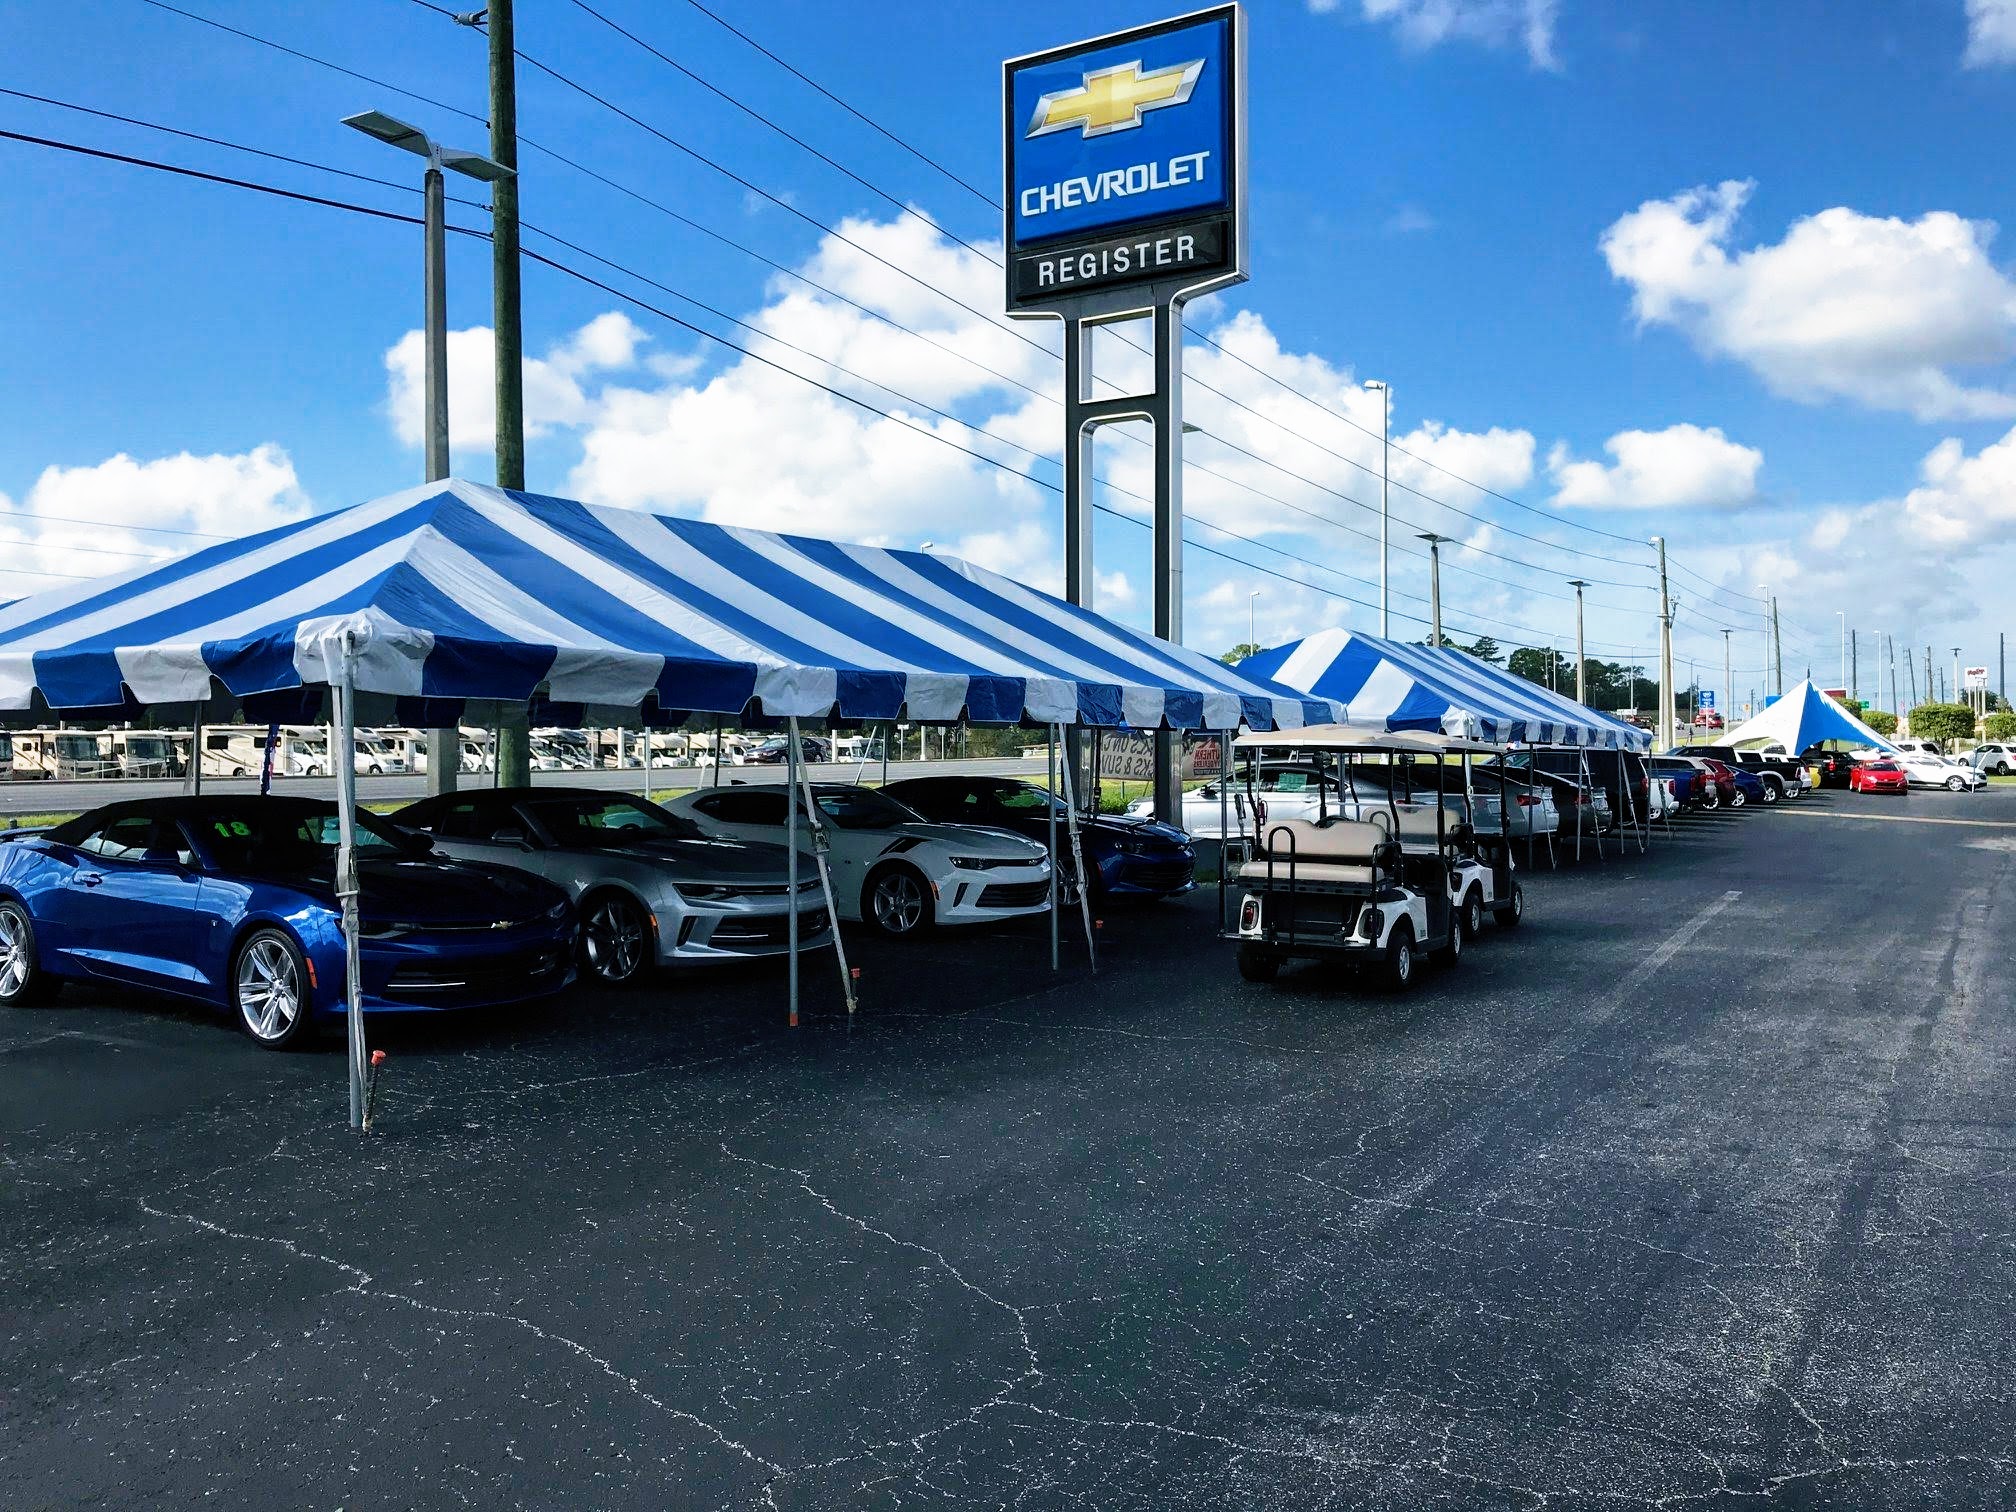 Giant Promotions frame tent rental in Central Florida - perfect for outdoor events.